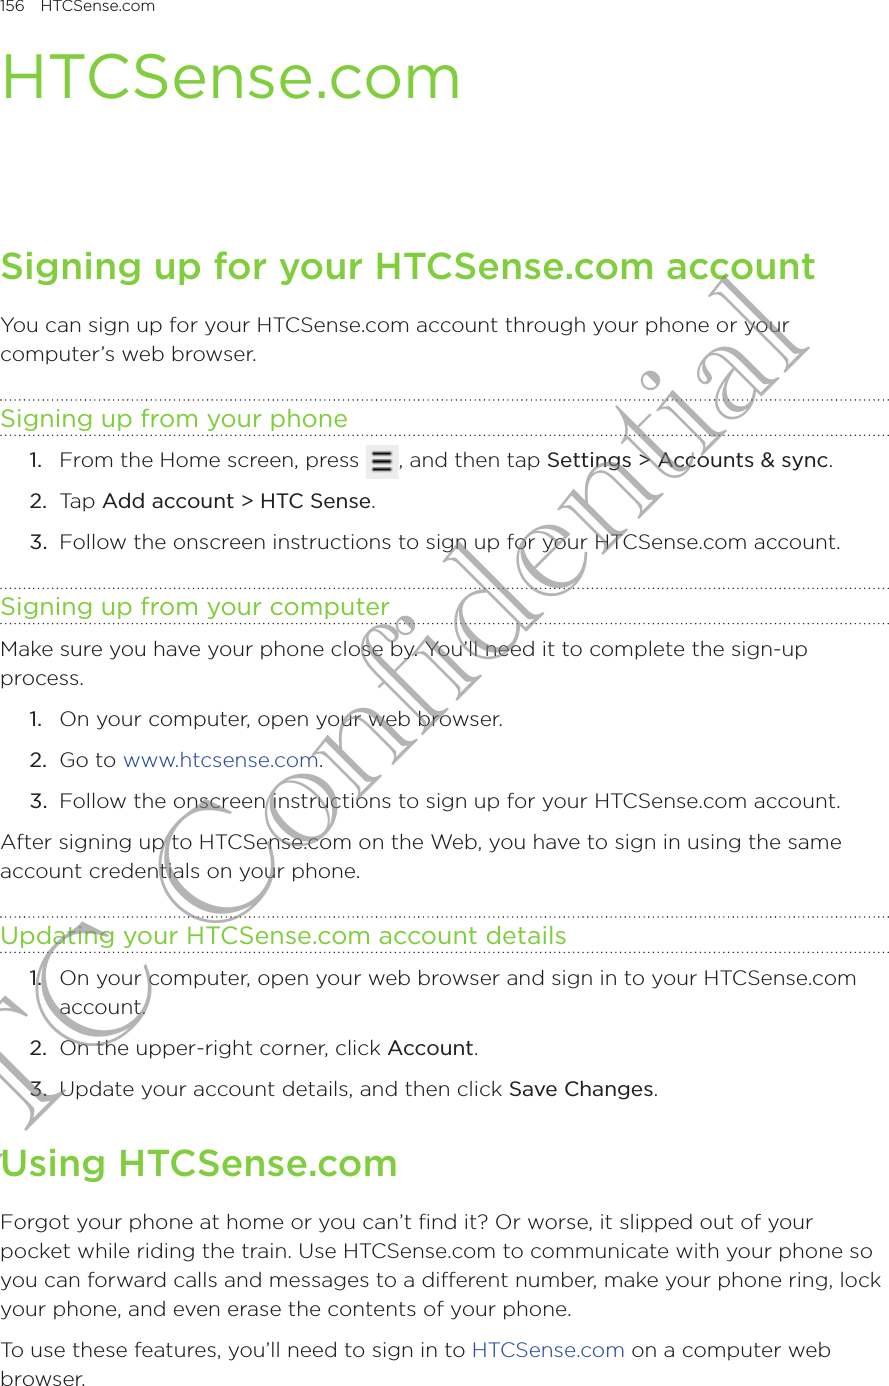 156  HTCSense.com      HTCSense.comSigning up for your HTCSense.com accountYou can sign up for your HTCSense.com account through your phone or your computer’s web browser.Signing up from your phoneFrom the Home screen, press  , and then tap Settings &gt; Accounts &amp; sync.Tap Add account &gt; HTC Sense.Follow the onscreen instructions to sign up for your HTCSense.com account.Signing up from your computerMake sure you have your phone close by. You’ll need it to complete the sign-up process.On your computer, open your web browser.Go to www.htcsense.com.Follow the onscreen instructions to sign up for your HTCSense.com account.After signing up to HTCSense.com on the Web, you have to sign in using the same account credentials on your phone.Updating your HTCSense.com account details1.  On your computer, open your web browser and sign in to your HTCSense.com account.2.  On the upper-right corner, click Account.3.  Update your account details, and then click Save Changes.Using HTCSense.comForgot your phone at home or you can’t find it? Or worse, it slipped out of your pocket while riding the train. Use HTCSense.com to communicate with your phone so you can forward calls and messages to a different number, make your phone ring, lock your phone, and even erase the contents of your phone. To use these features, you’ll need to sign in to HTCSense.com on a computer web browser.1.2.3.1.2.3.HTC Confidential